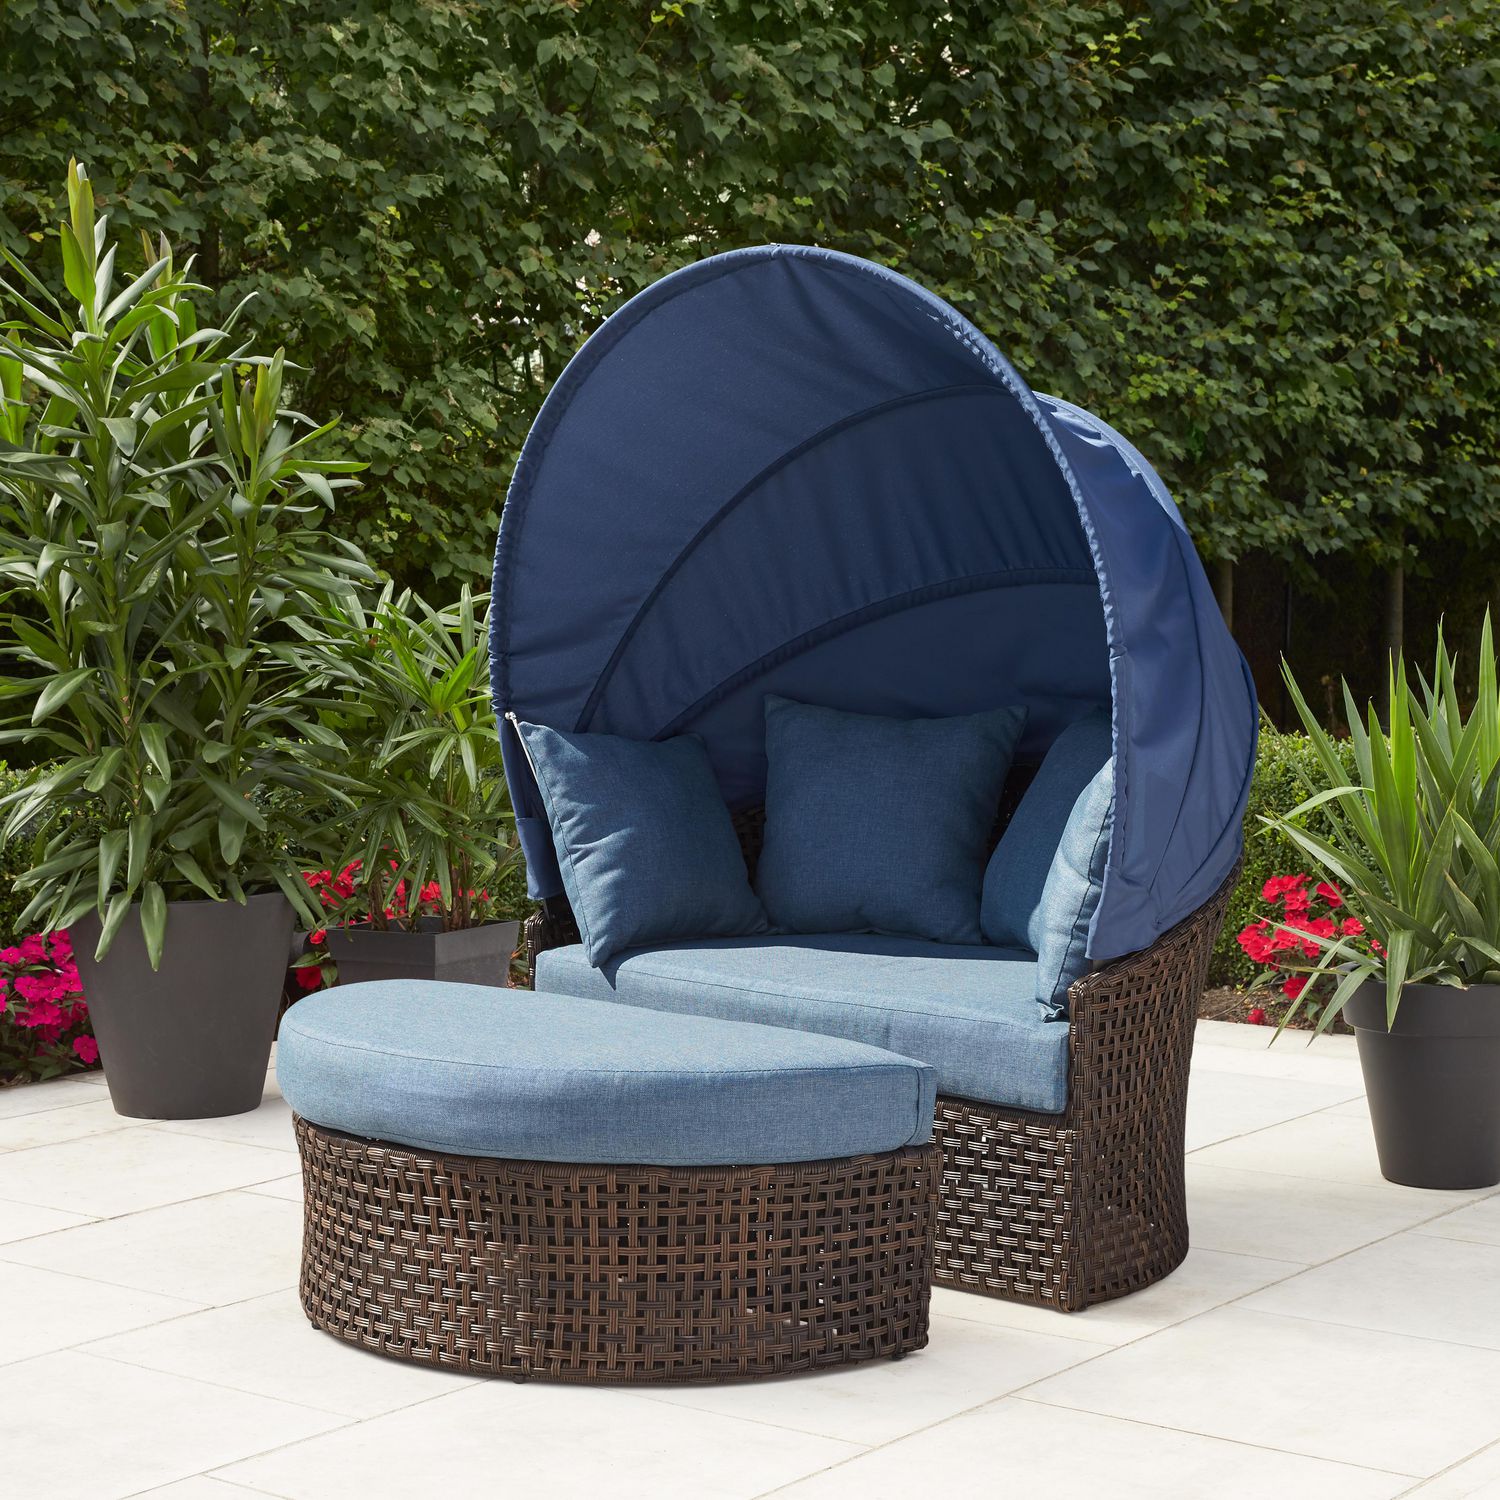 Hometrends Tuscany Ii Canopy Day Bed, Outdoor Bed With Canopy Canada